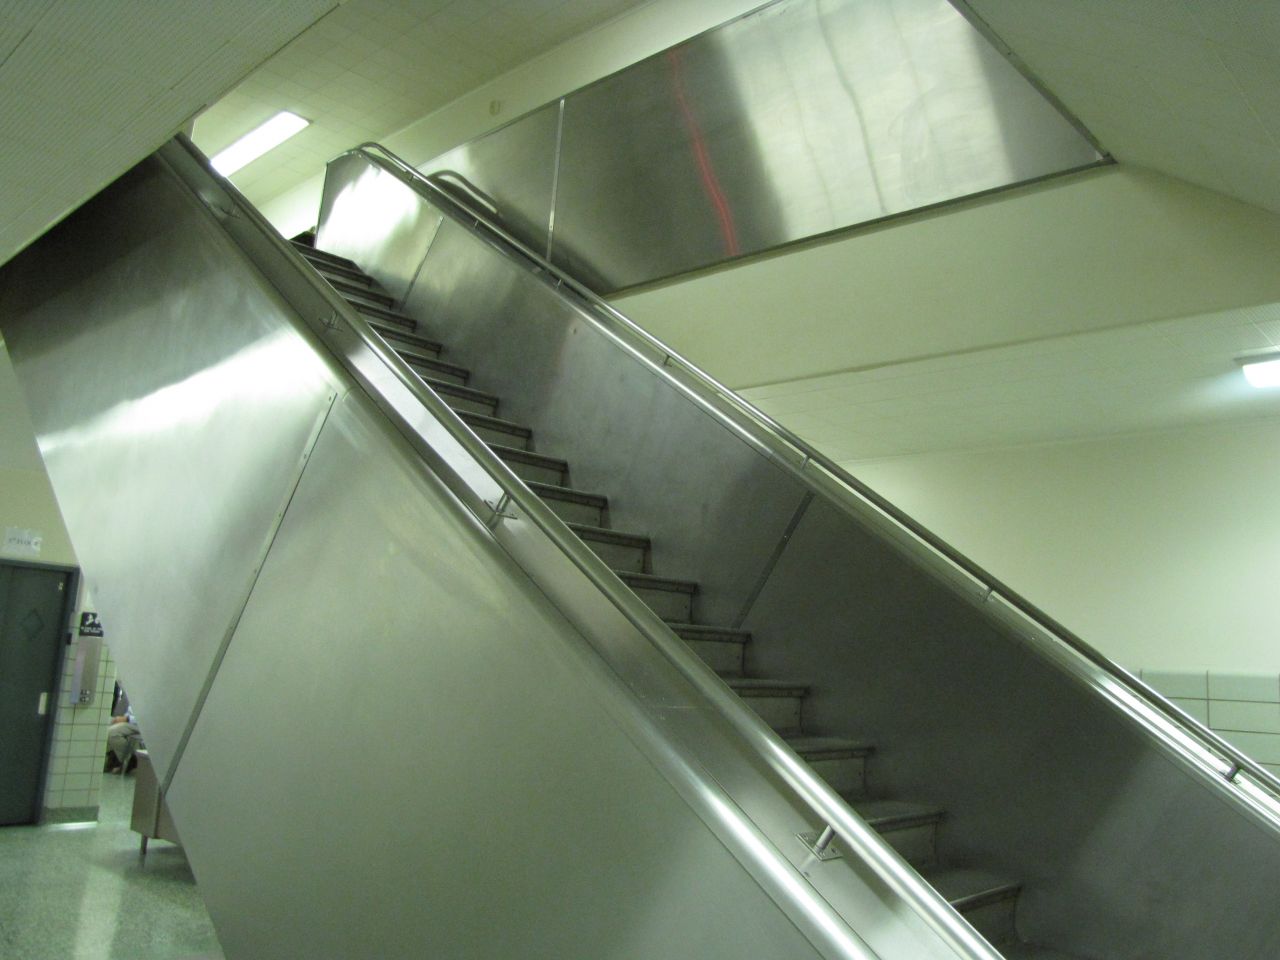 The staircases are covered in stainless steel.